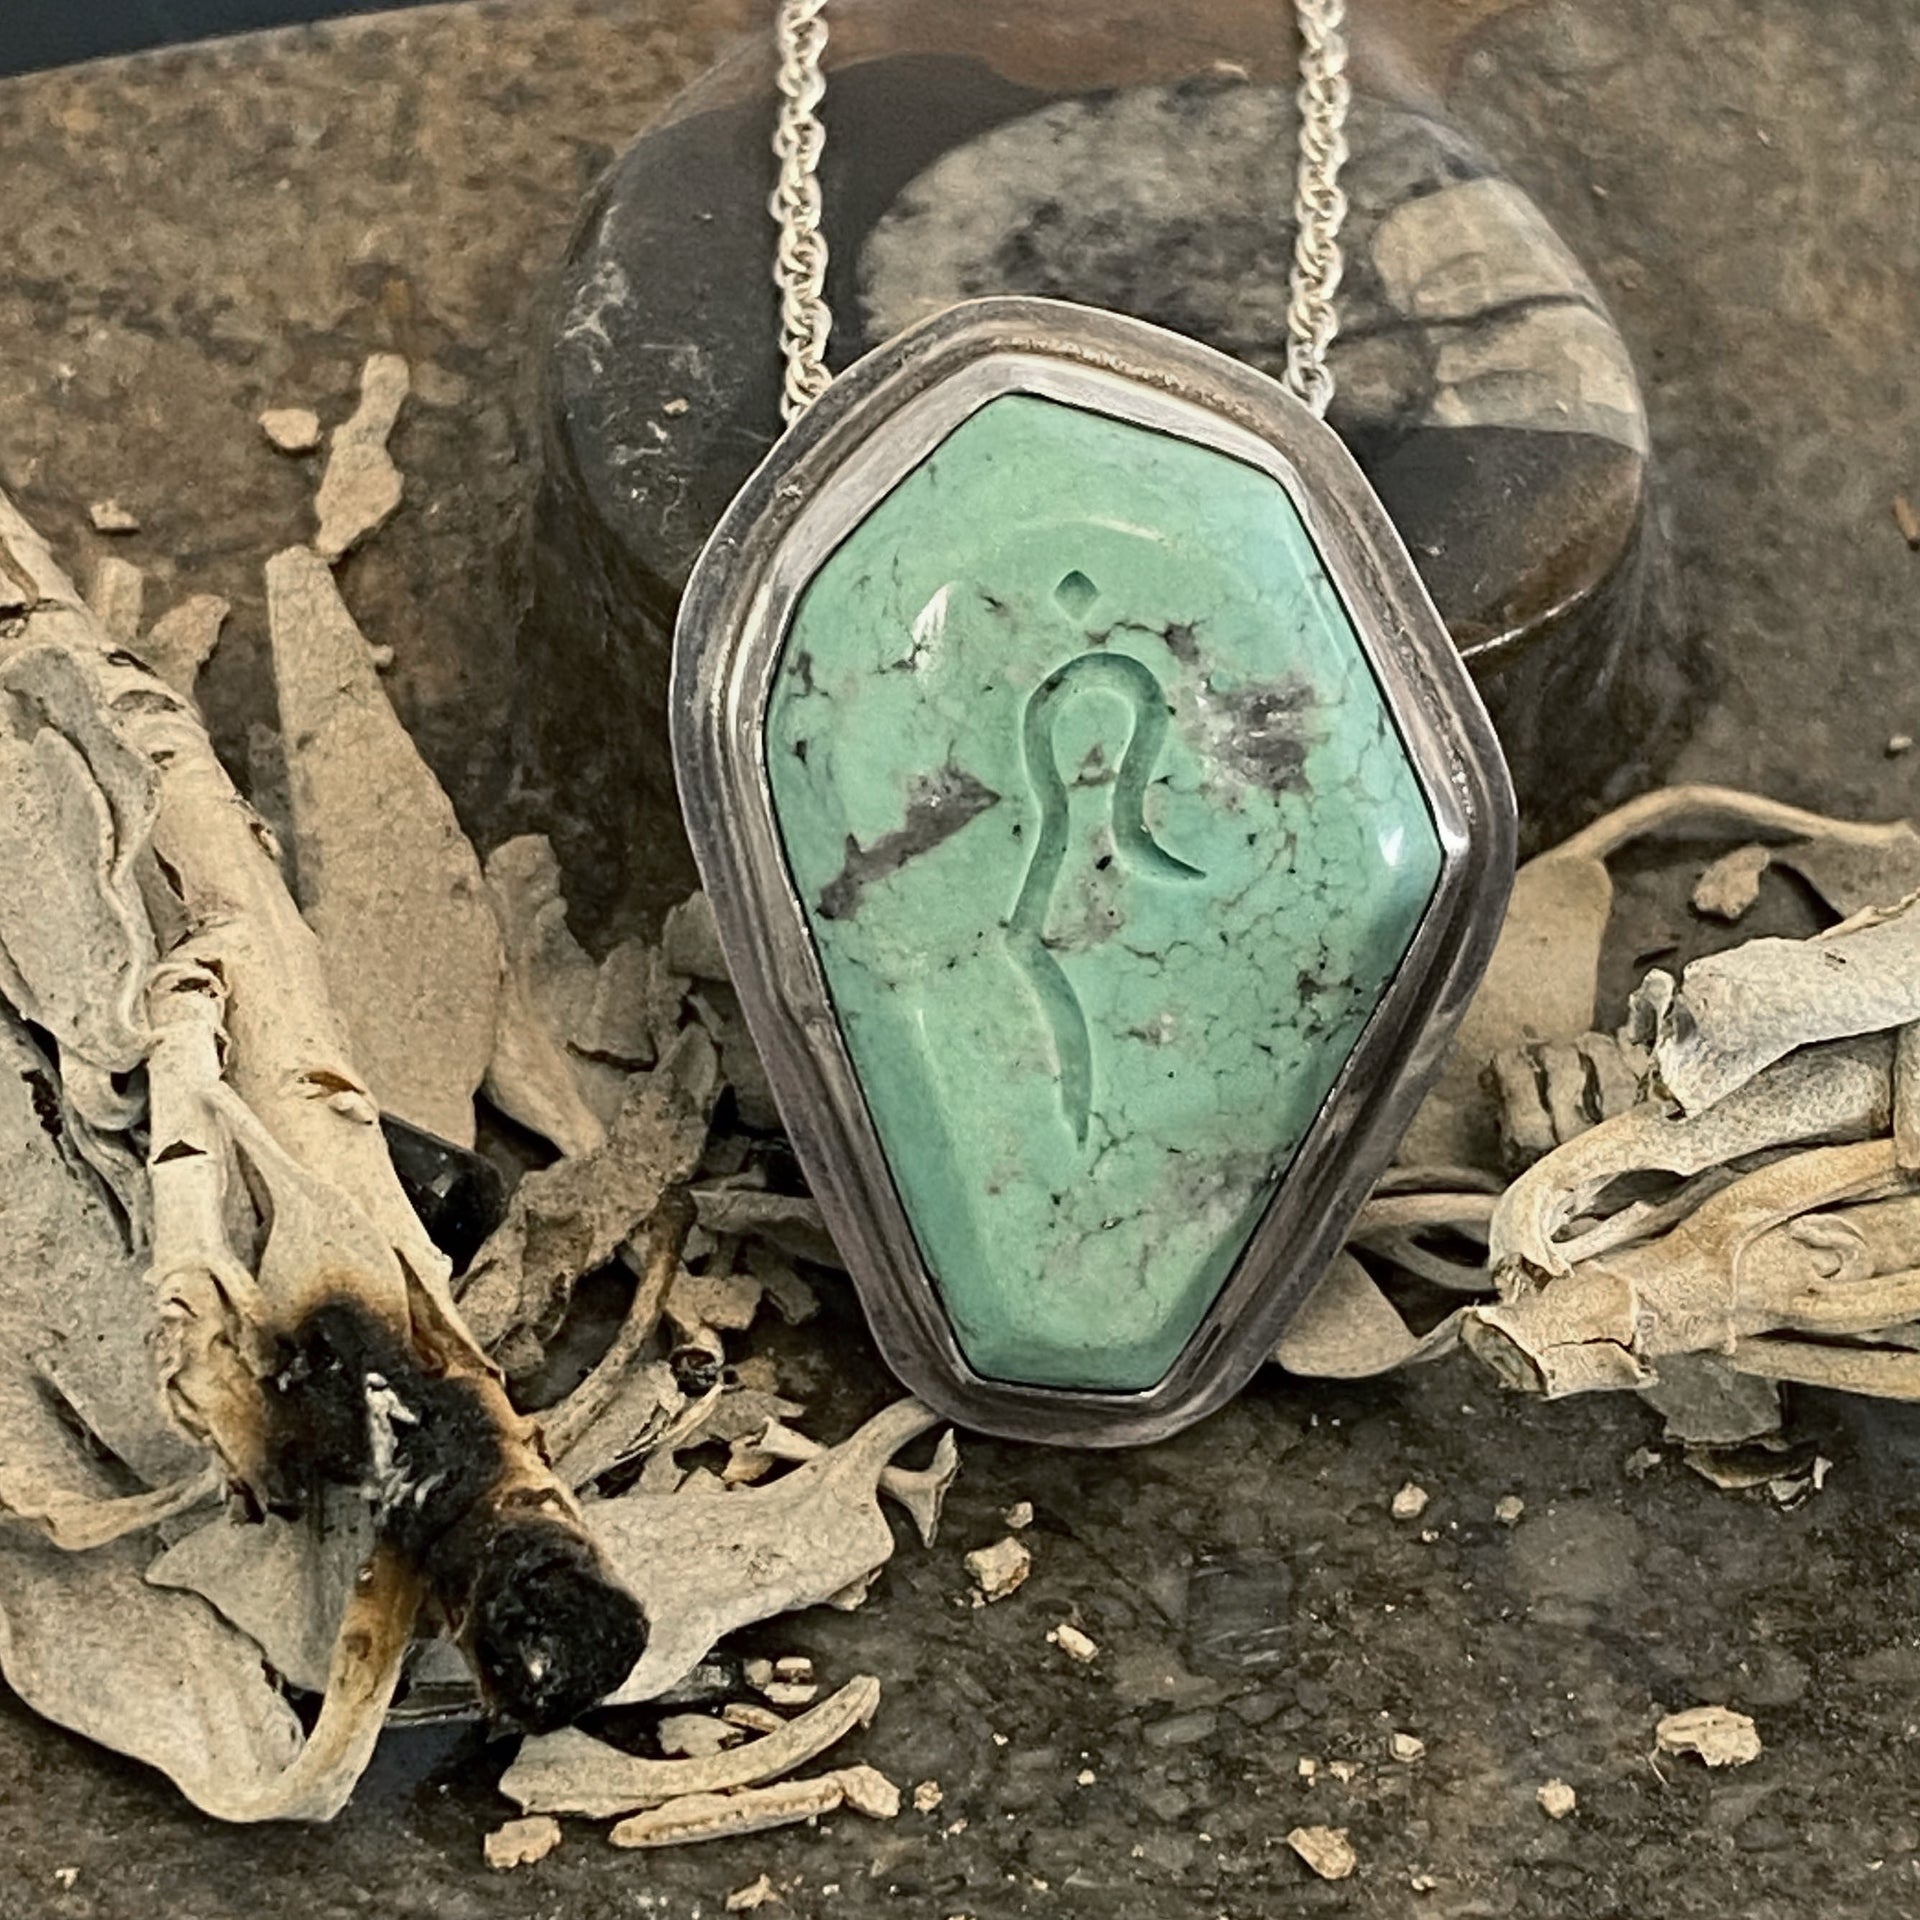 Turquoise Sterling Silver Pendant with Divine Feminine Symbol